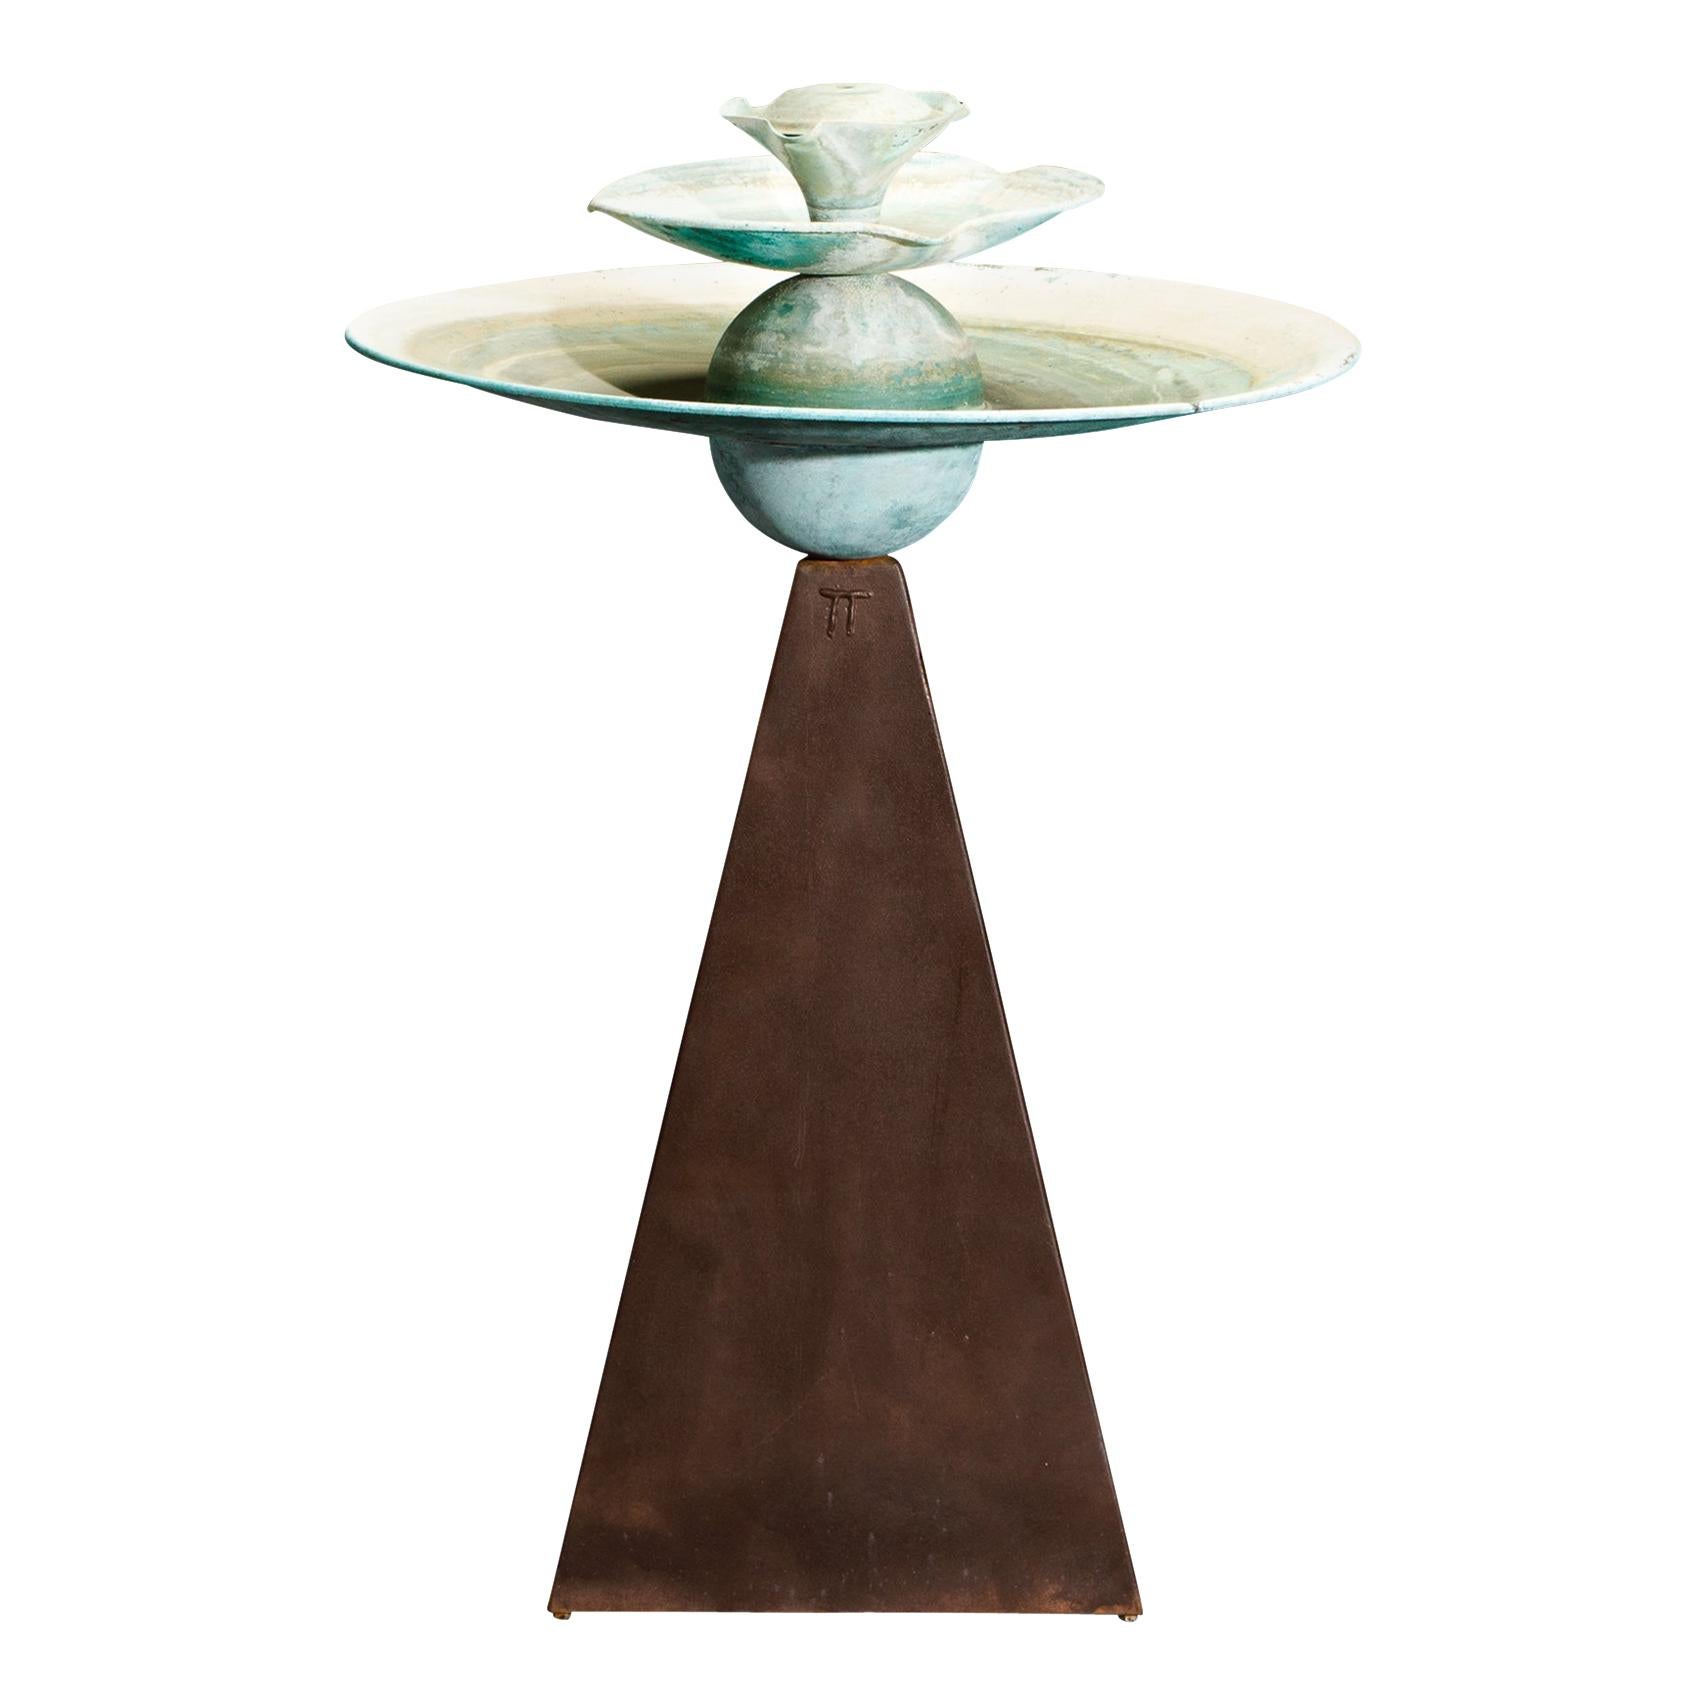 'Pyramid' by Tom Torrens Patinated Copper Fountain Bird Bath, 1990s, Signed